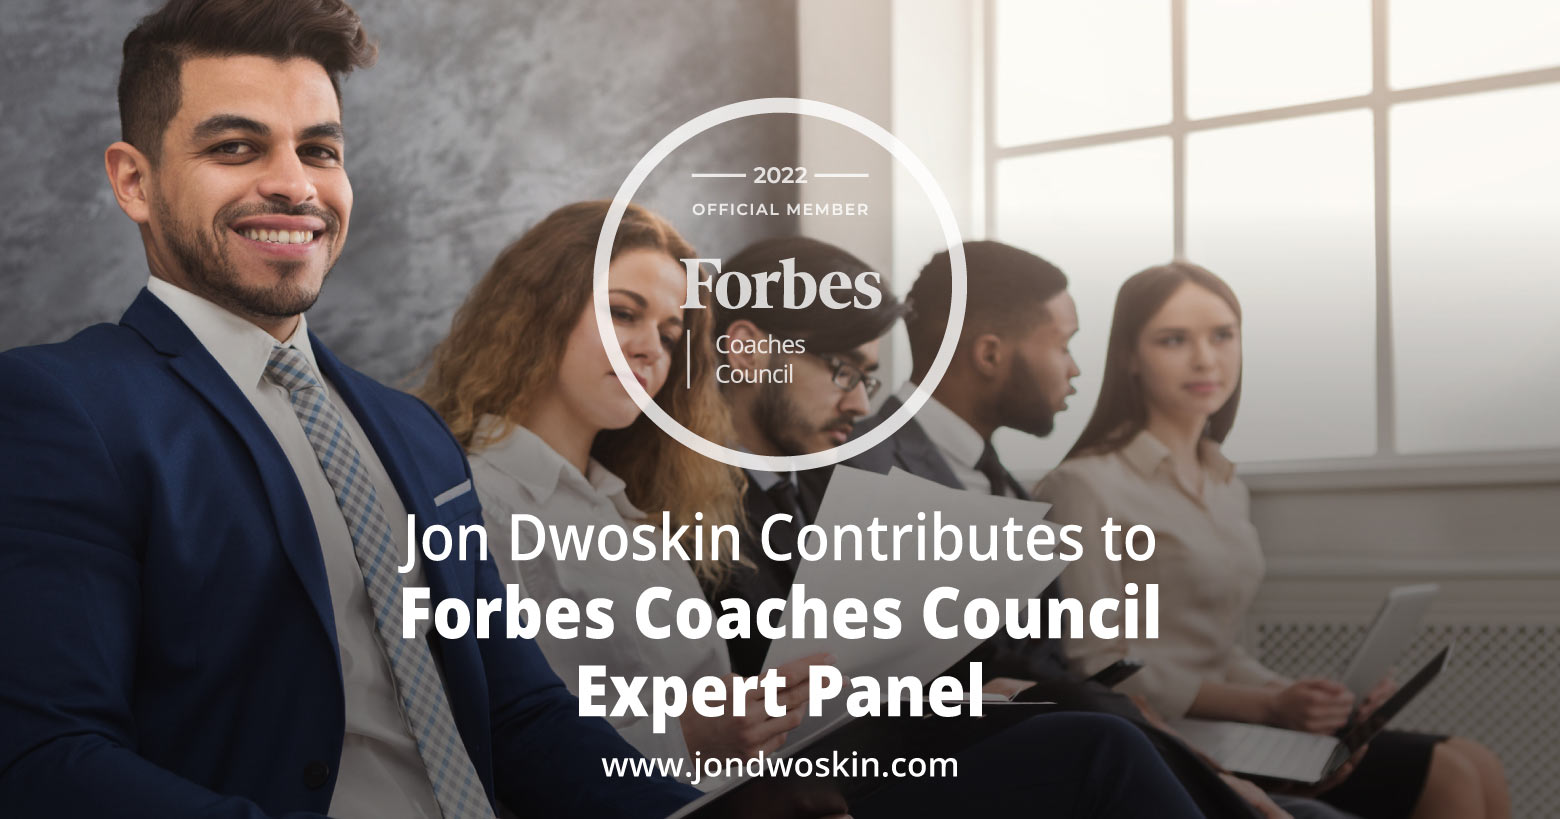 Jon Dwoskin Contributes to Forbes Coaches Council Expert Panel: 14 Creative Ways Job Seekers Can Stand Out To Potential Employers